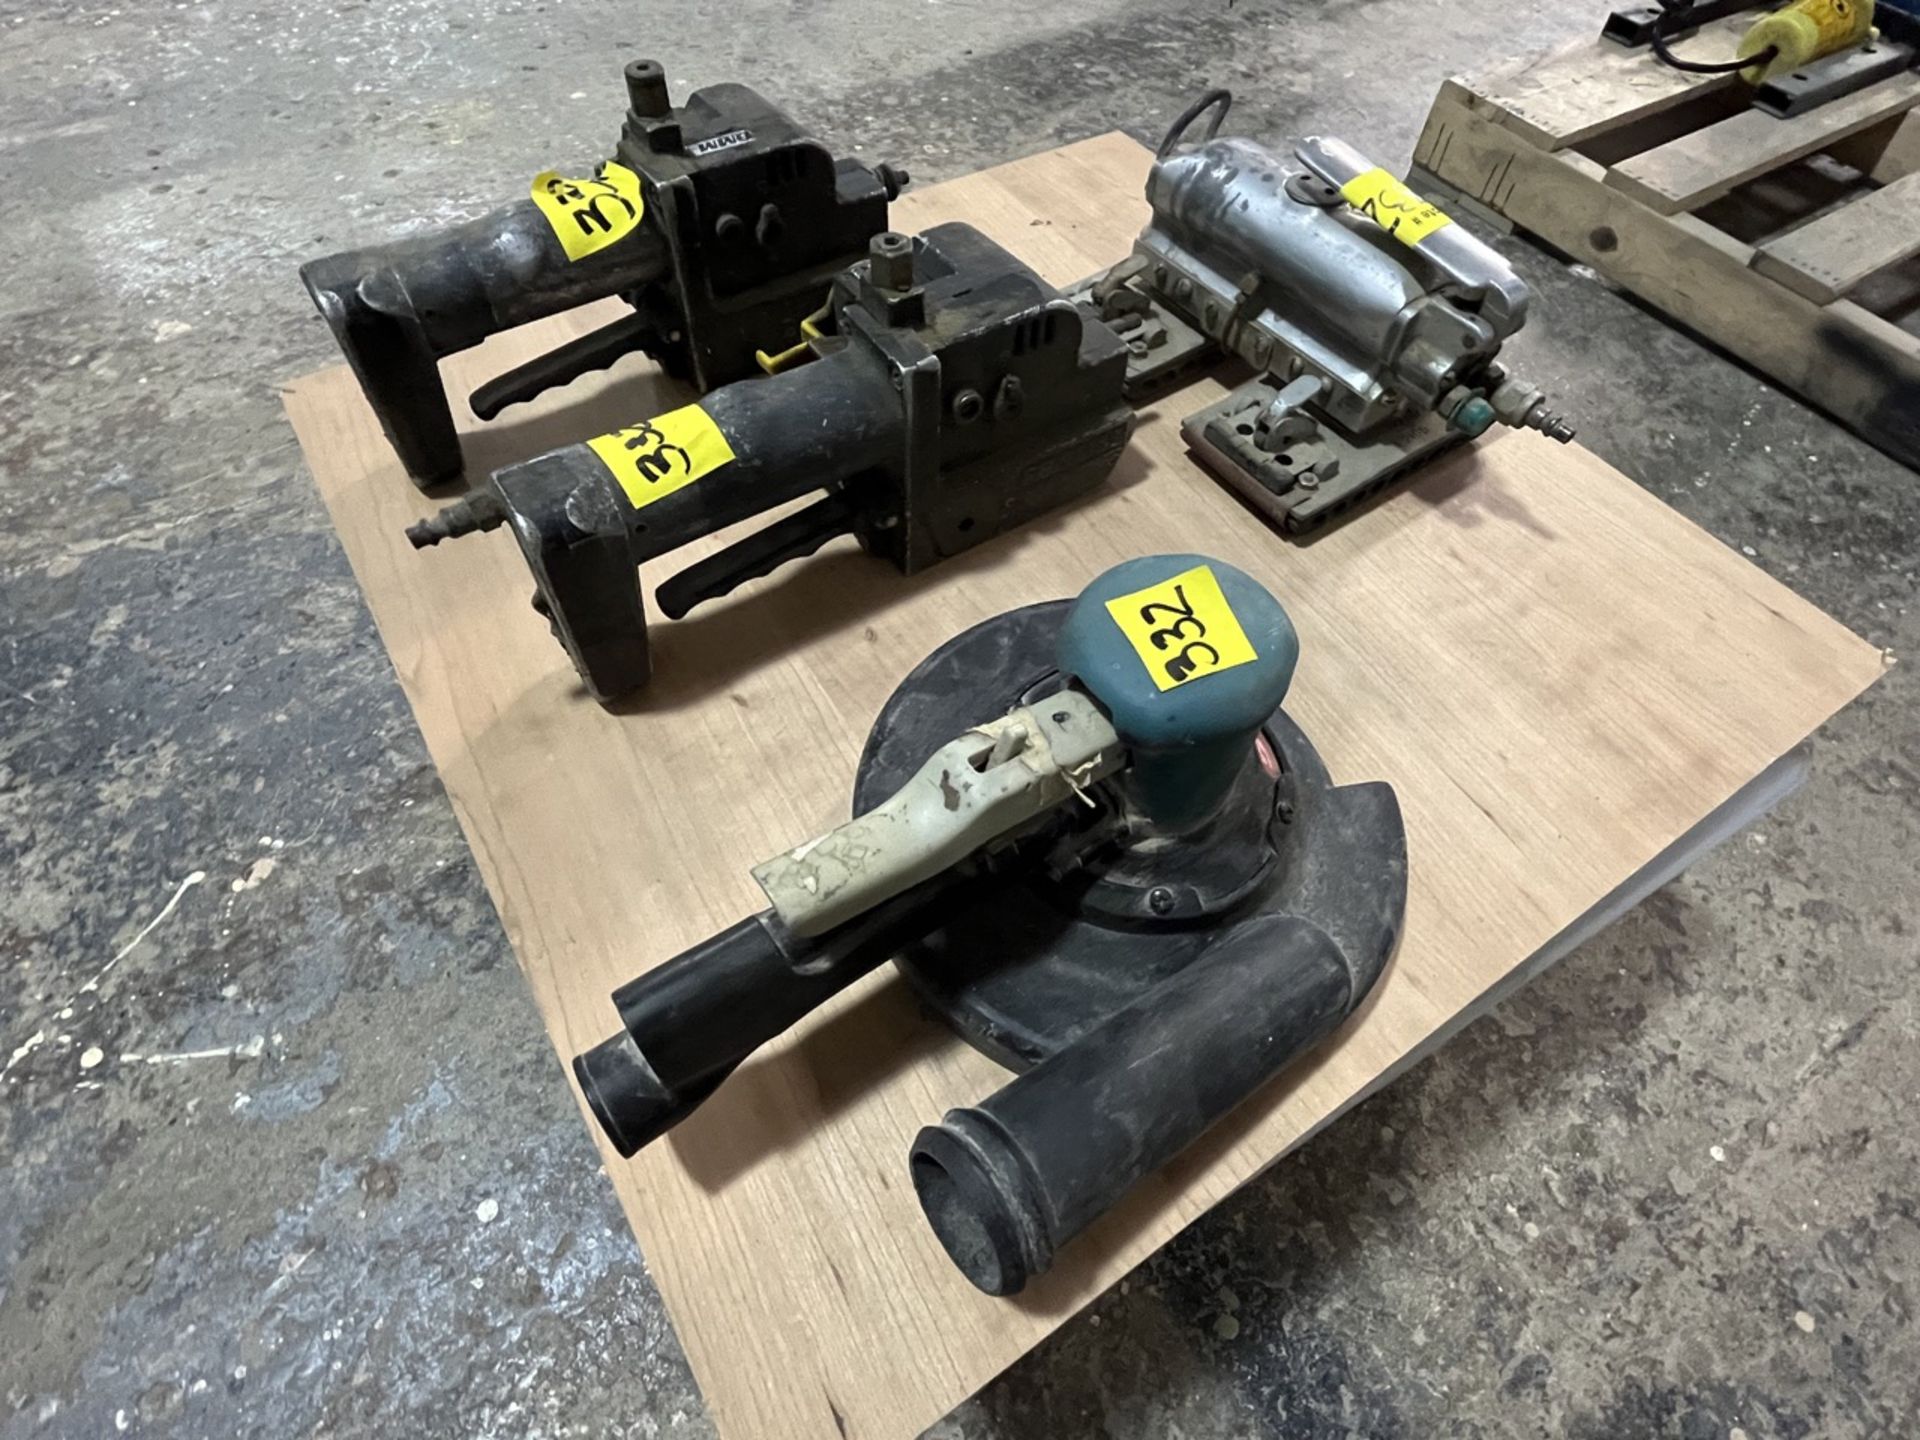 Lot of 4 pieces contains: 2 Fromm brand pneumatic wood brushes; 1 Sundstrand brand pneumatic sander - Image 3 of 10